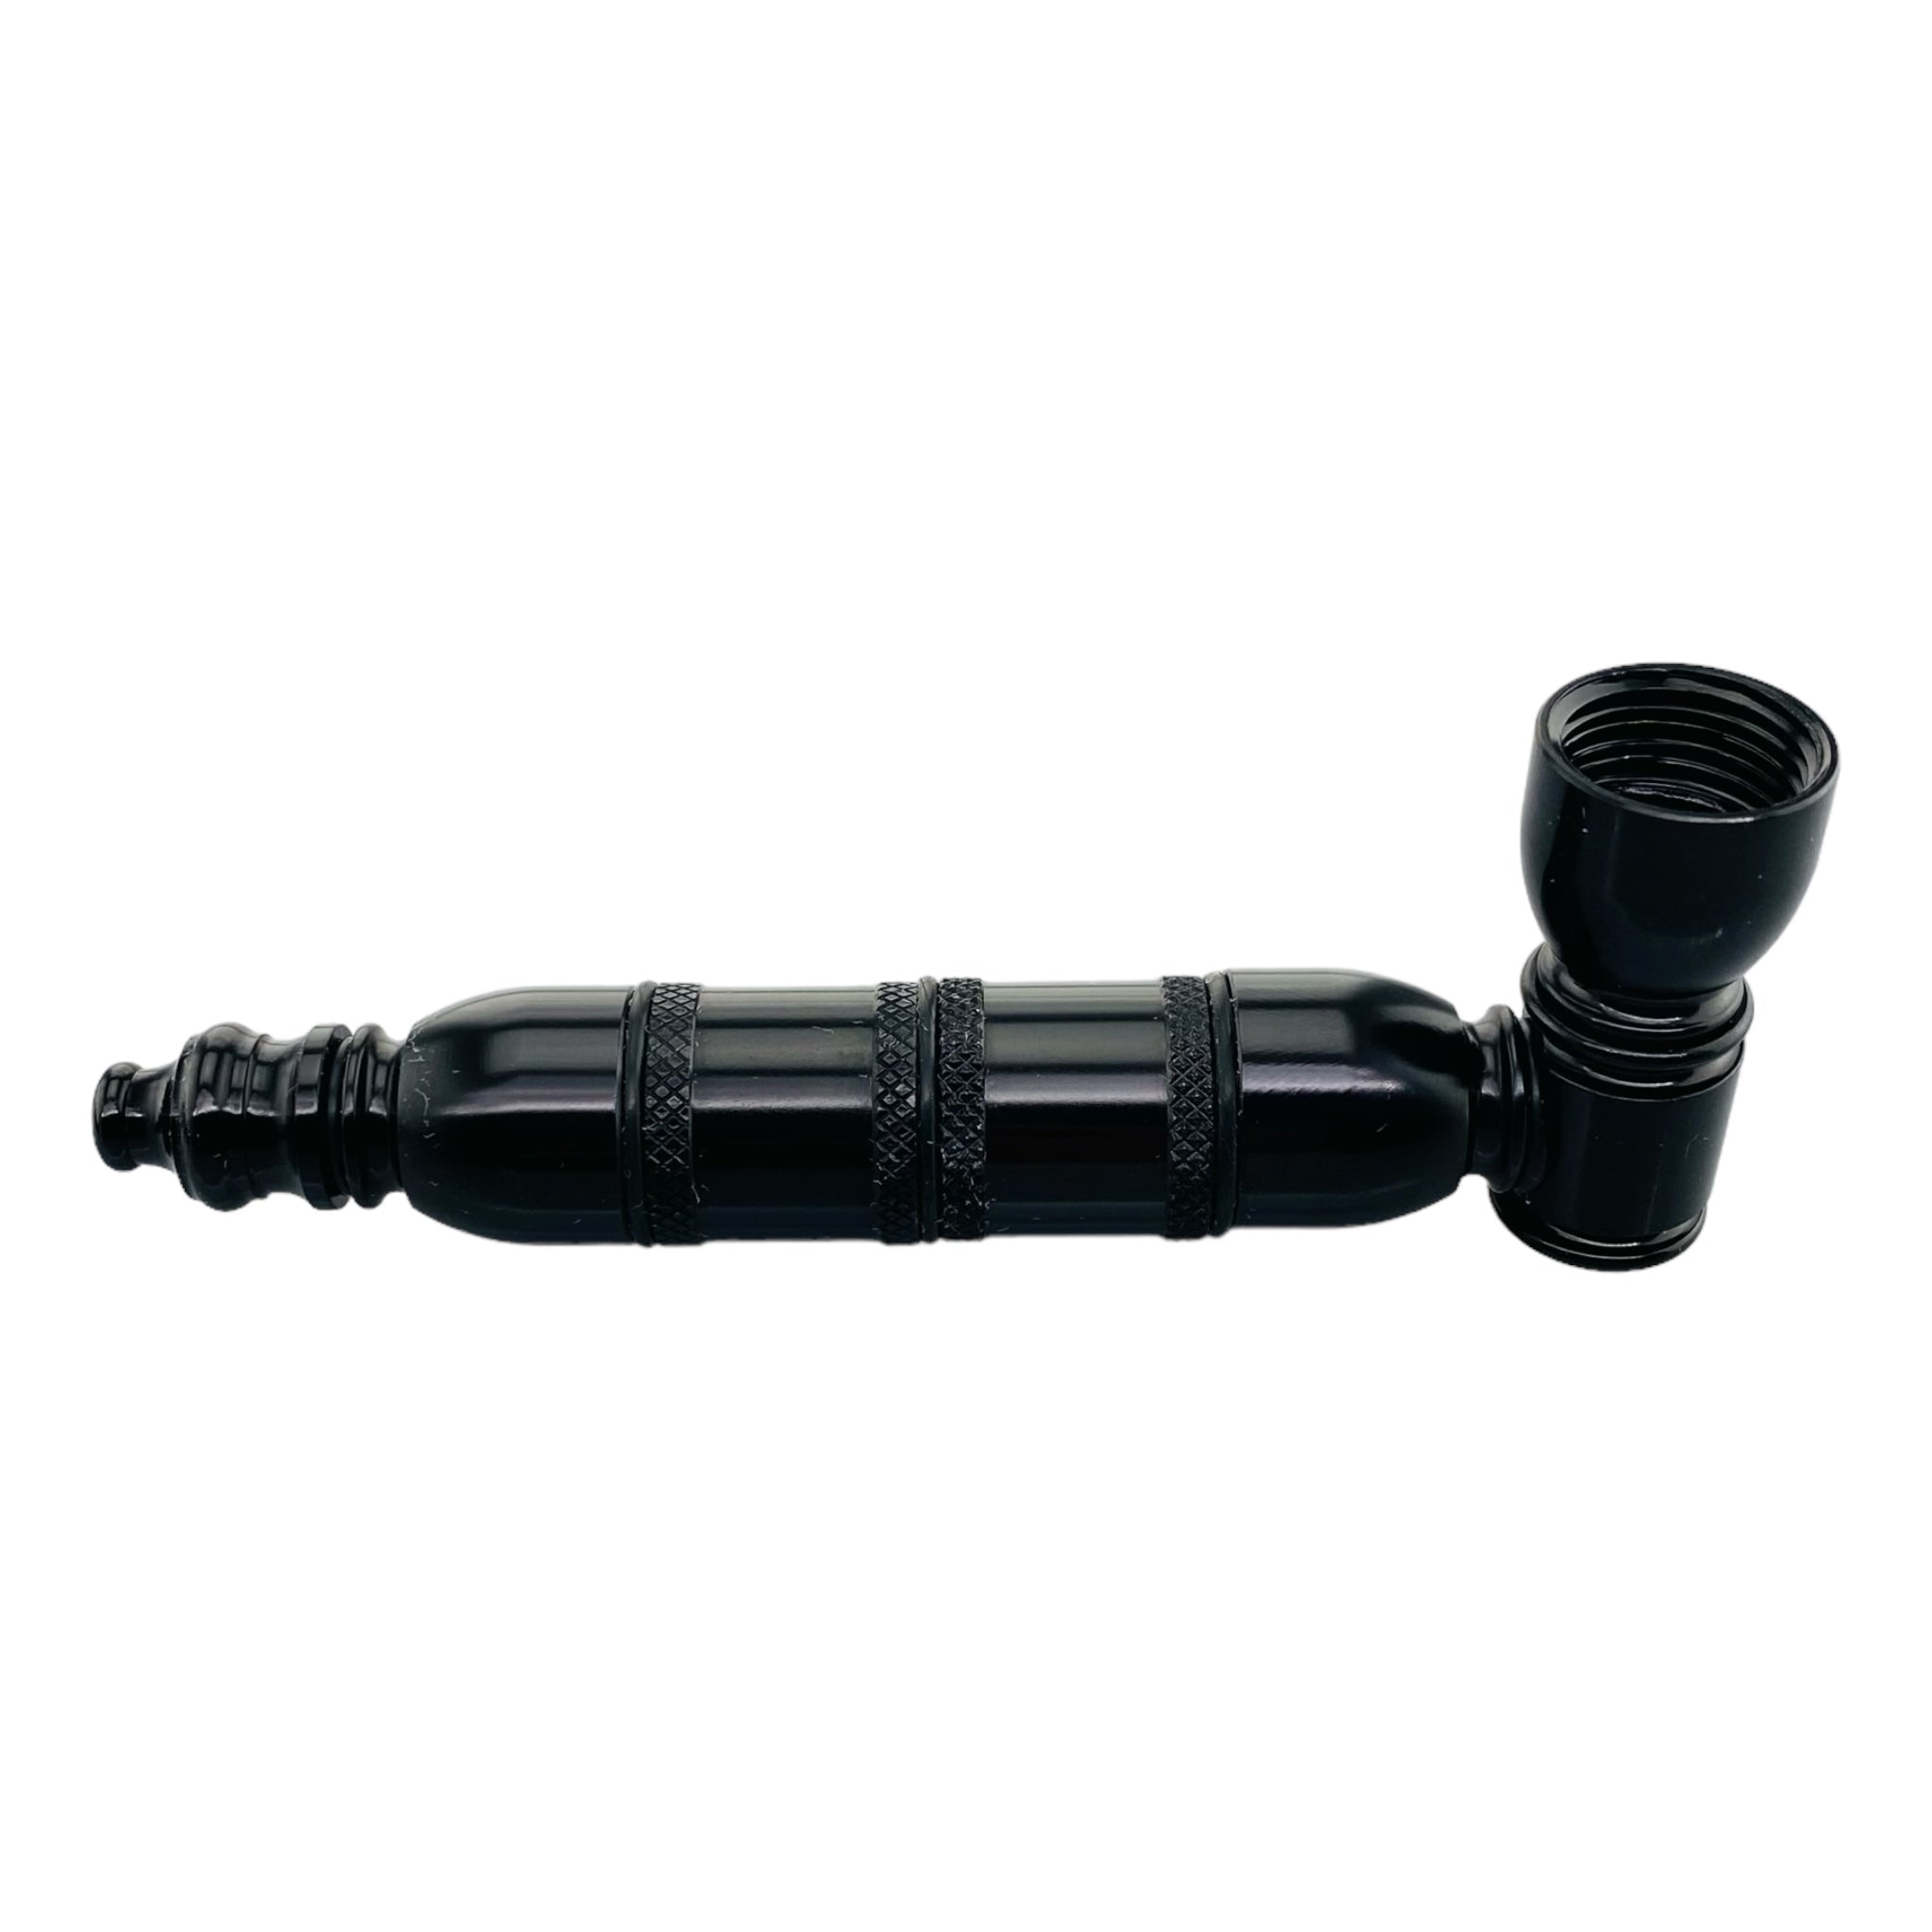 multiple chamber metal smoking pipe for weed pot cannabis or tobacco for sale